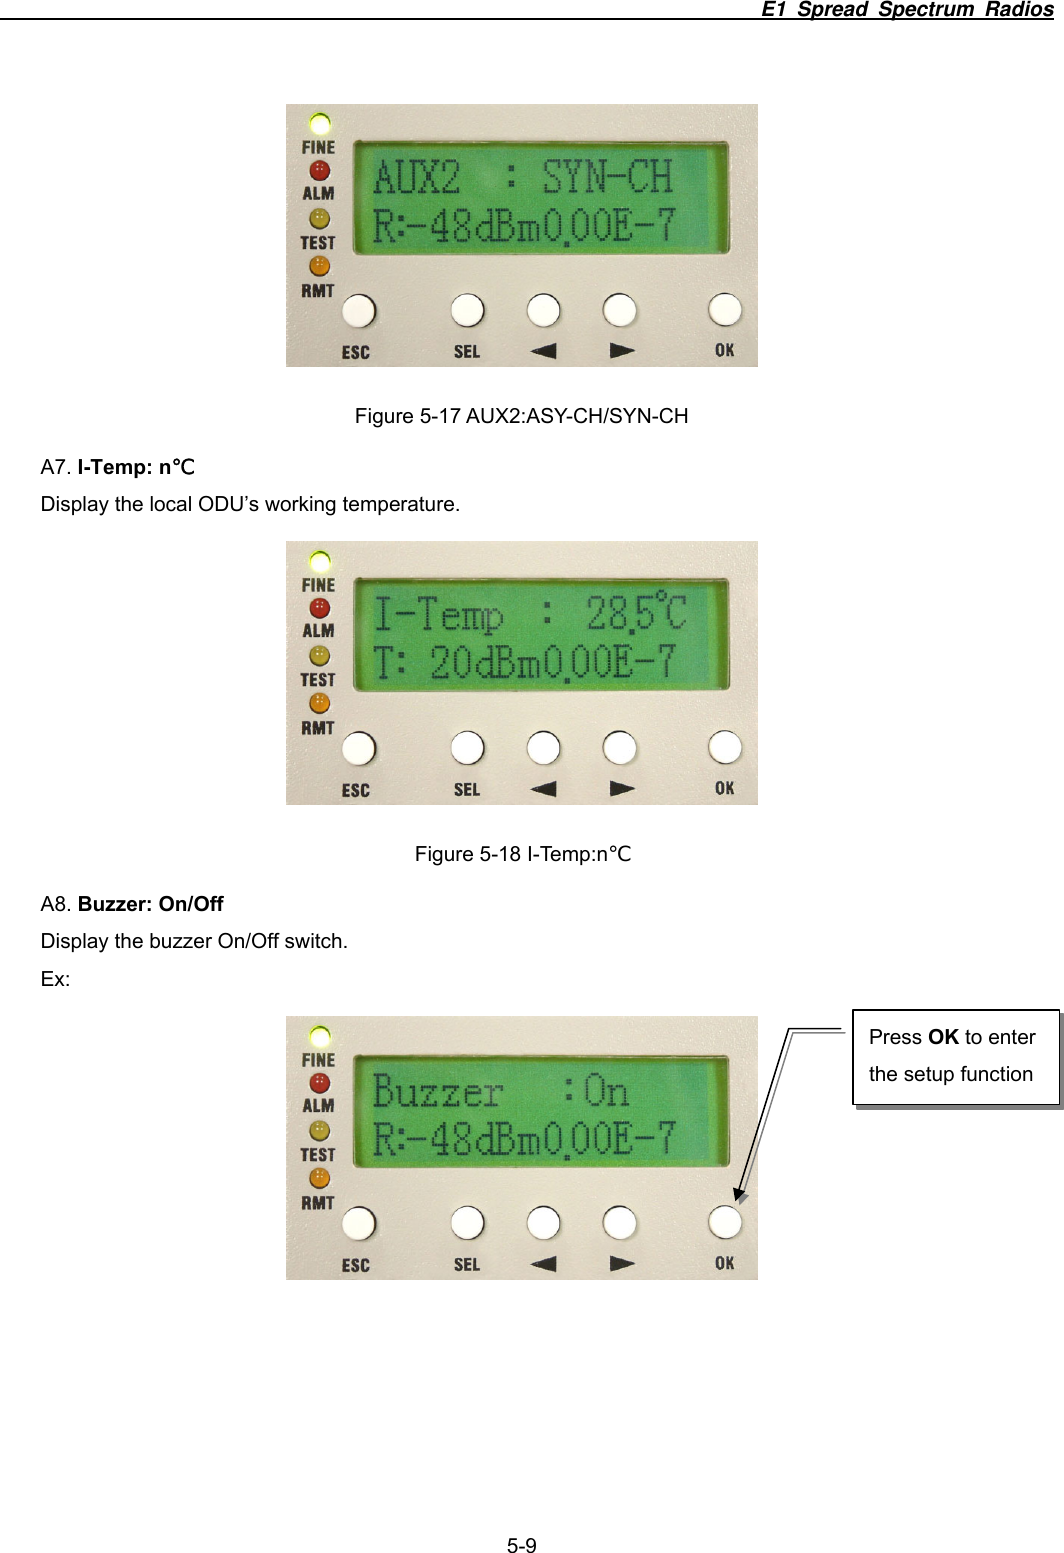                                                                          E1 Spread Spectrum Radios              5-9  Figure 5-17 AUX2:ASY-CH/SYN-CH A7. I-Temp: n℃ Display the local ODU’s working temperature.  Figure 5-18 I-Temp:n℃ A8. Buzzer: On/Off Display the buzzer On/Off switch.   Ex:  Press OK to enter the setup function 